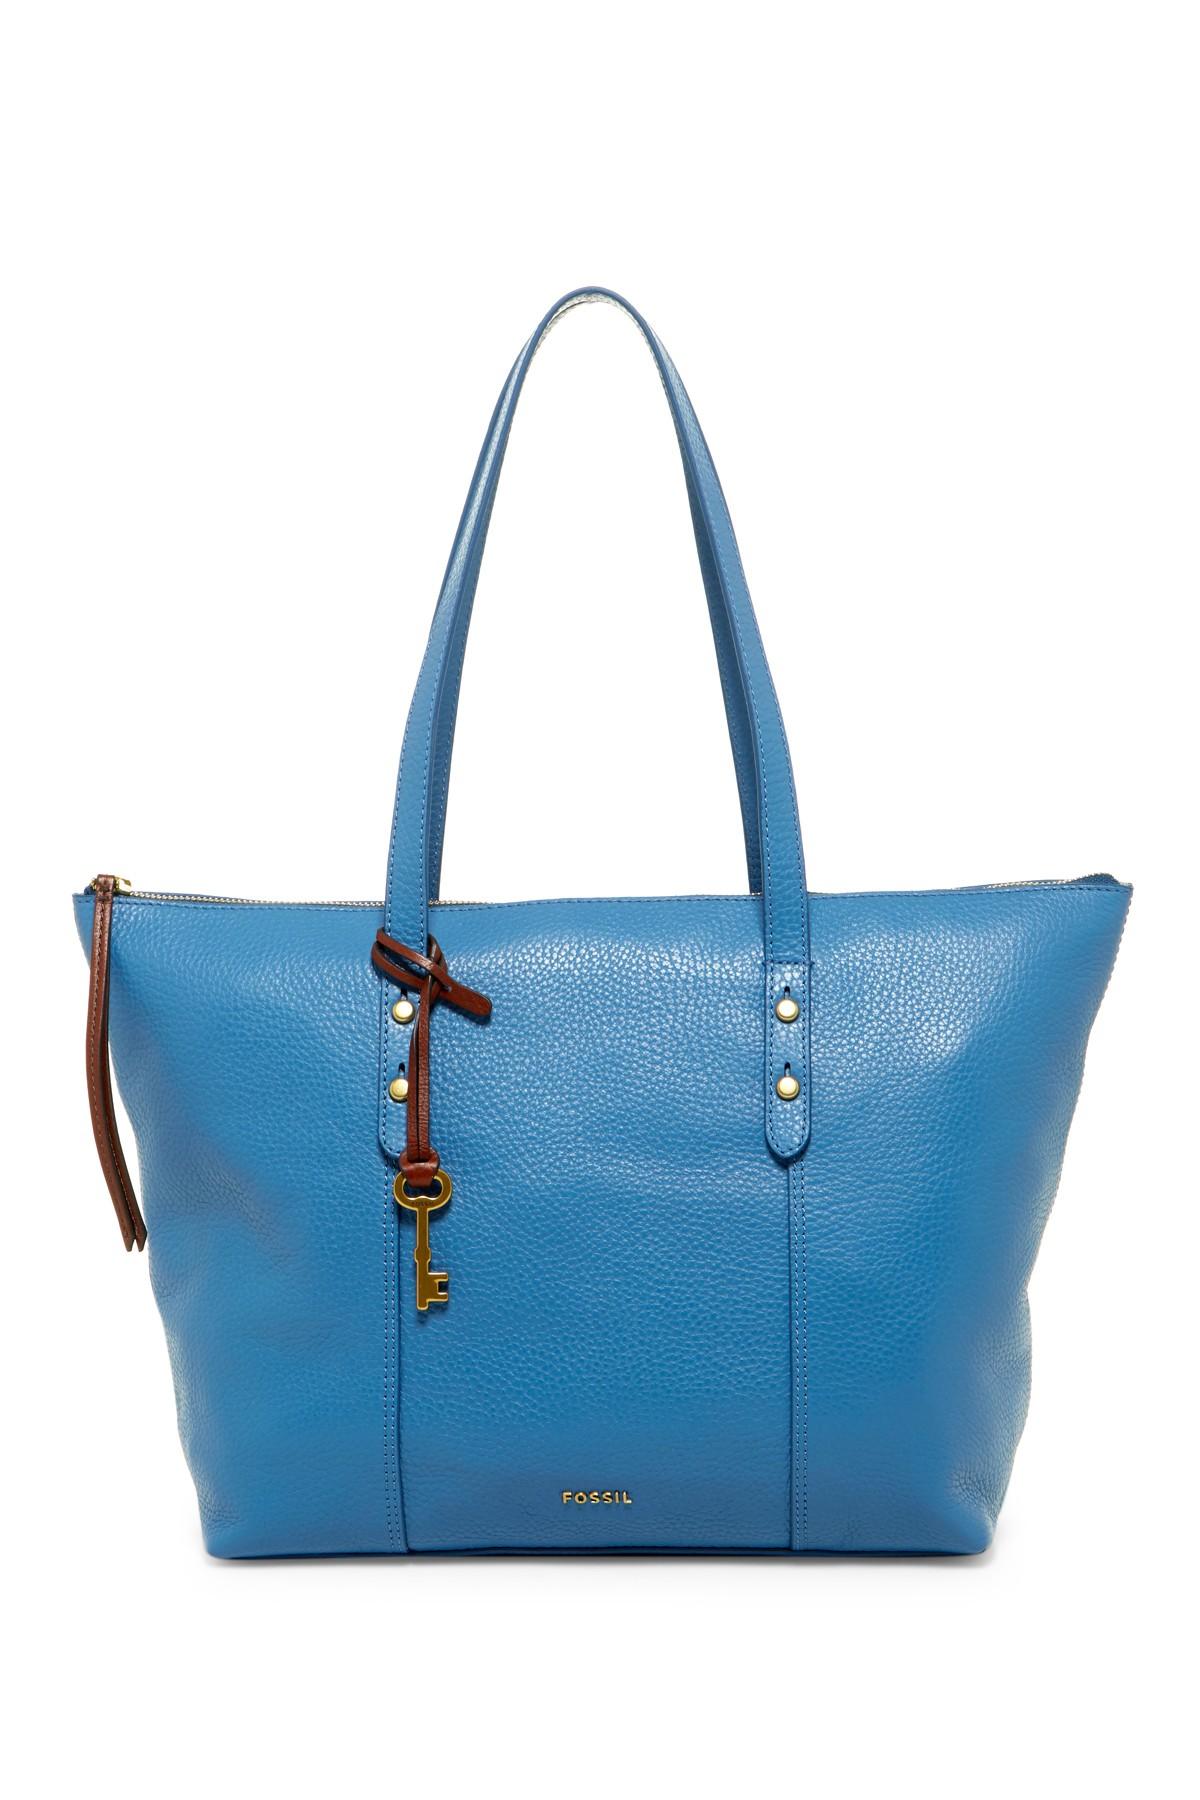 Fossil Jenna Leather Tote in Blue | Lyst